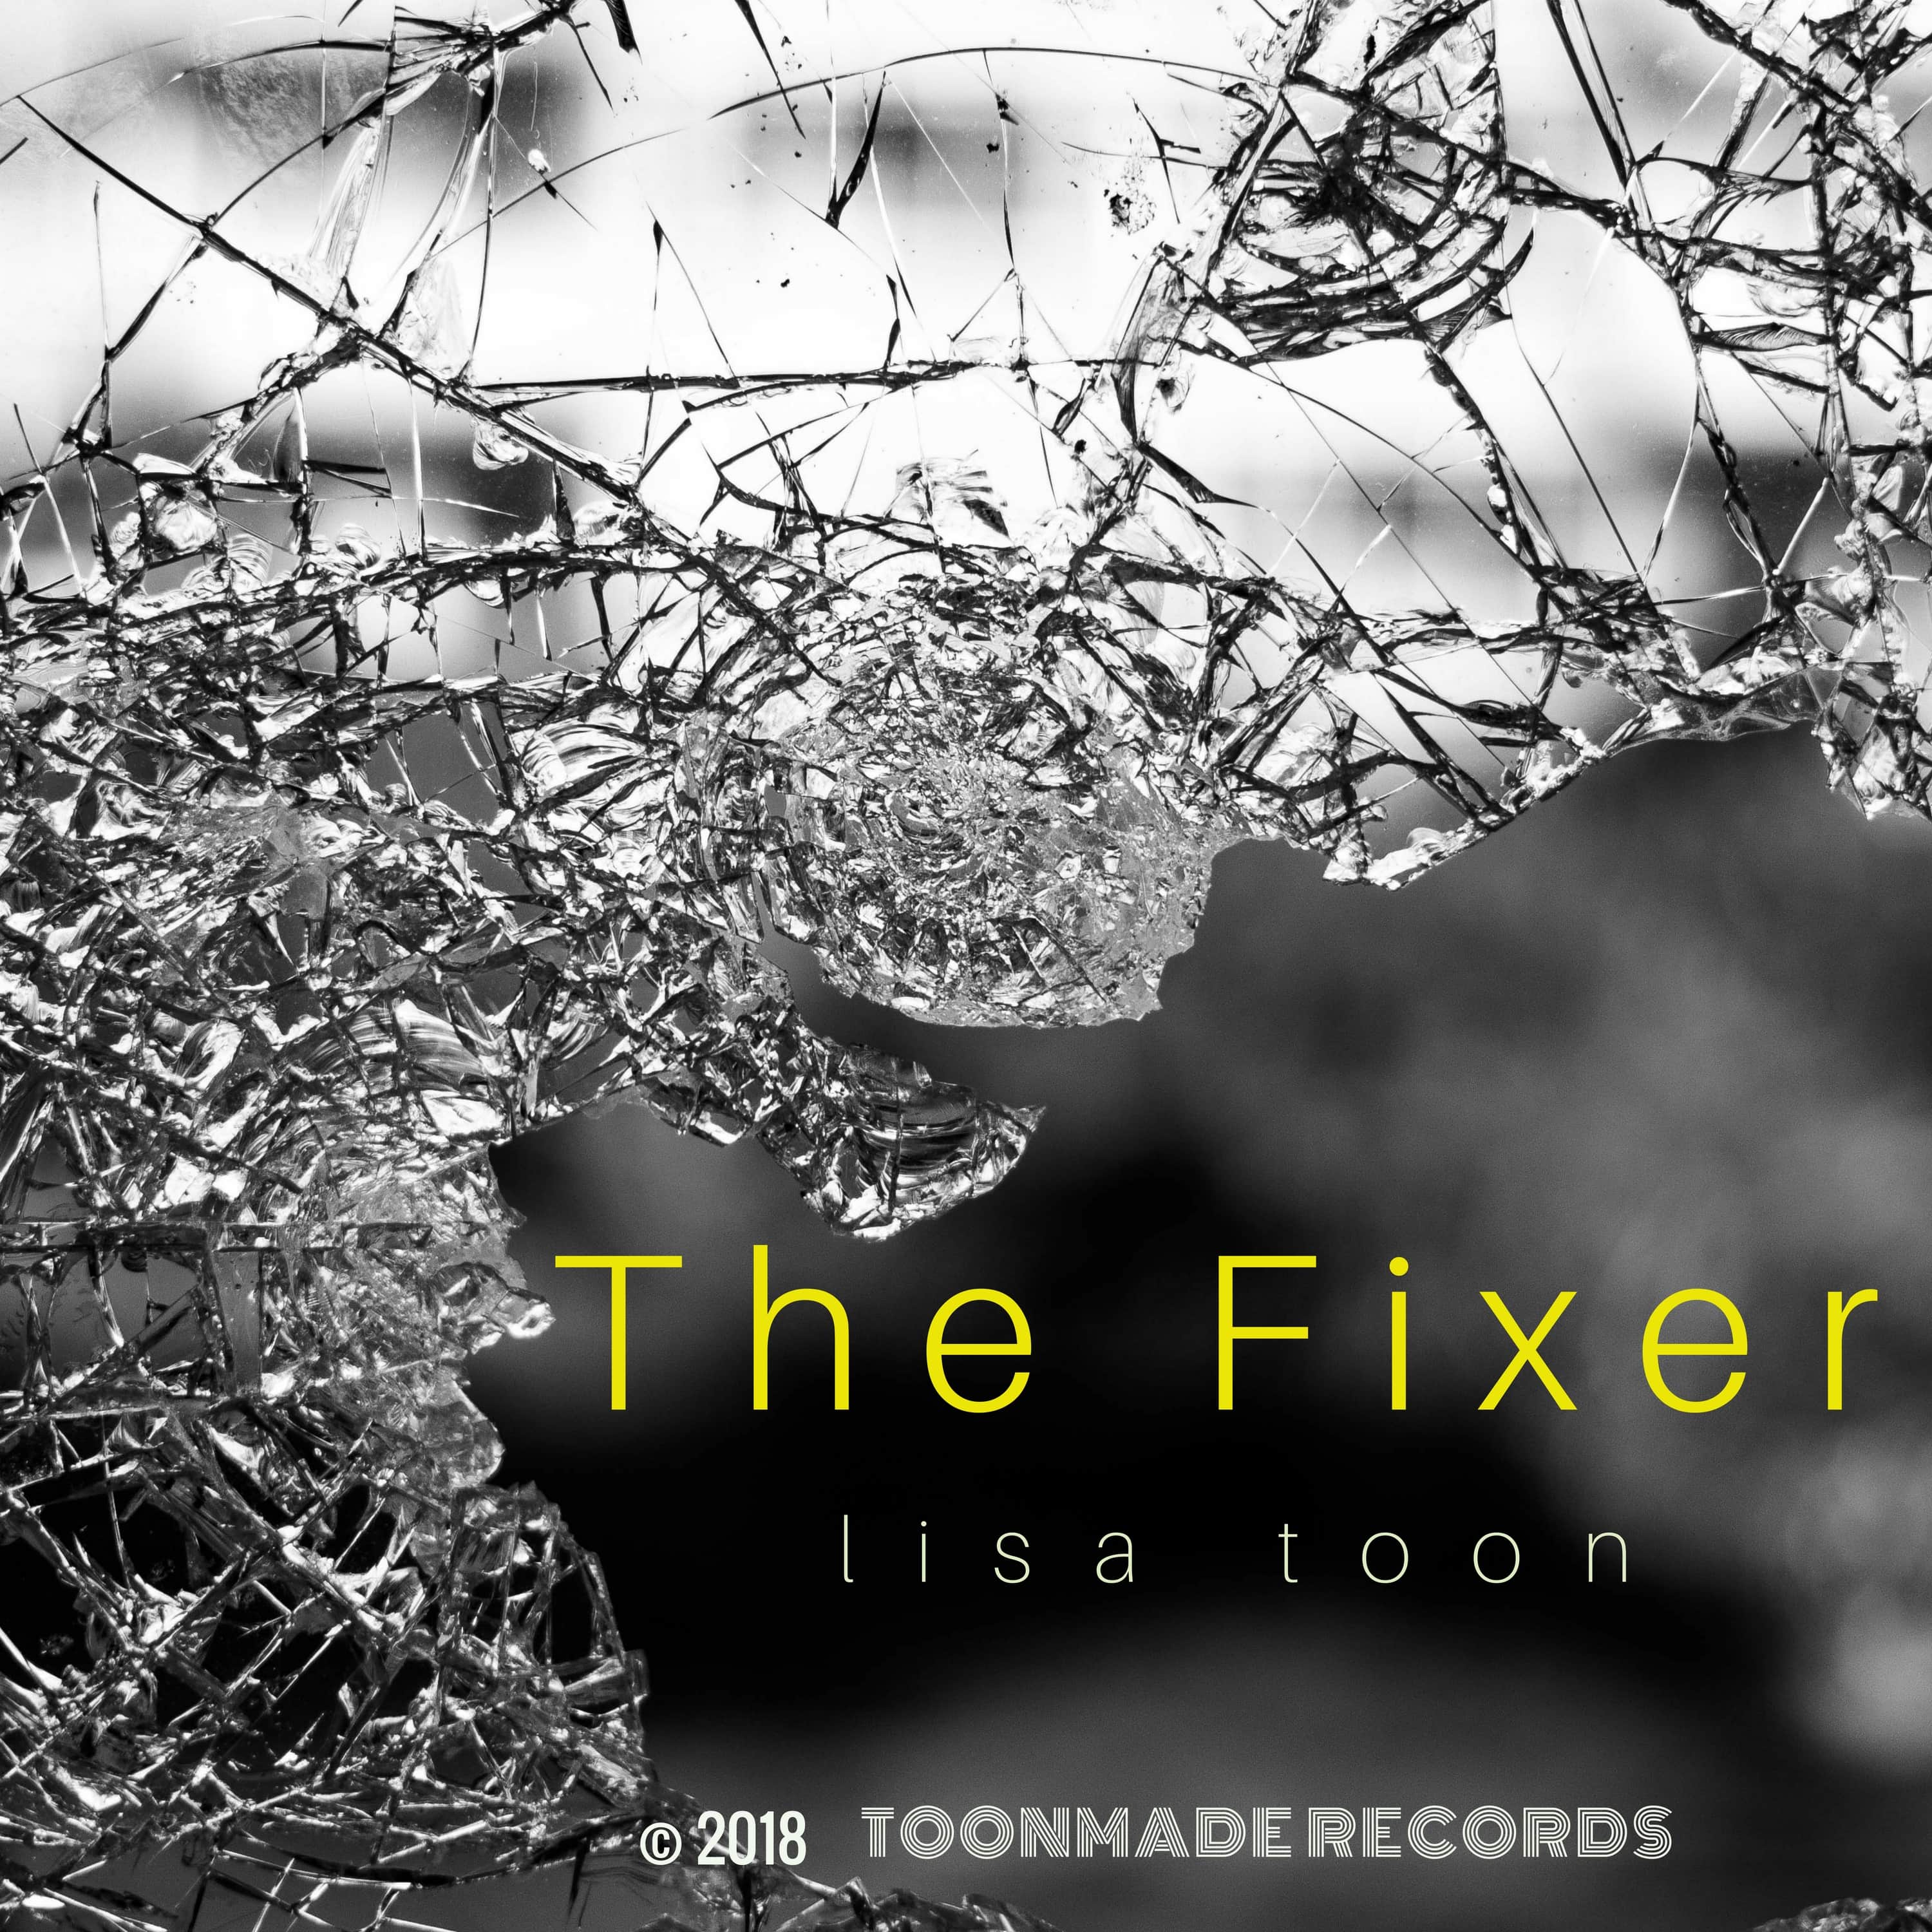 The Fixer – Single by Lisa Toon